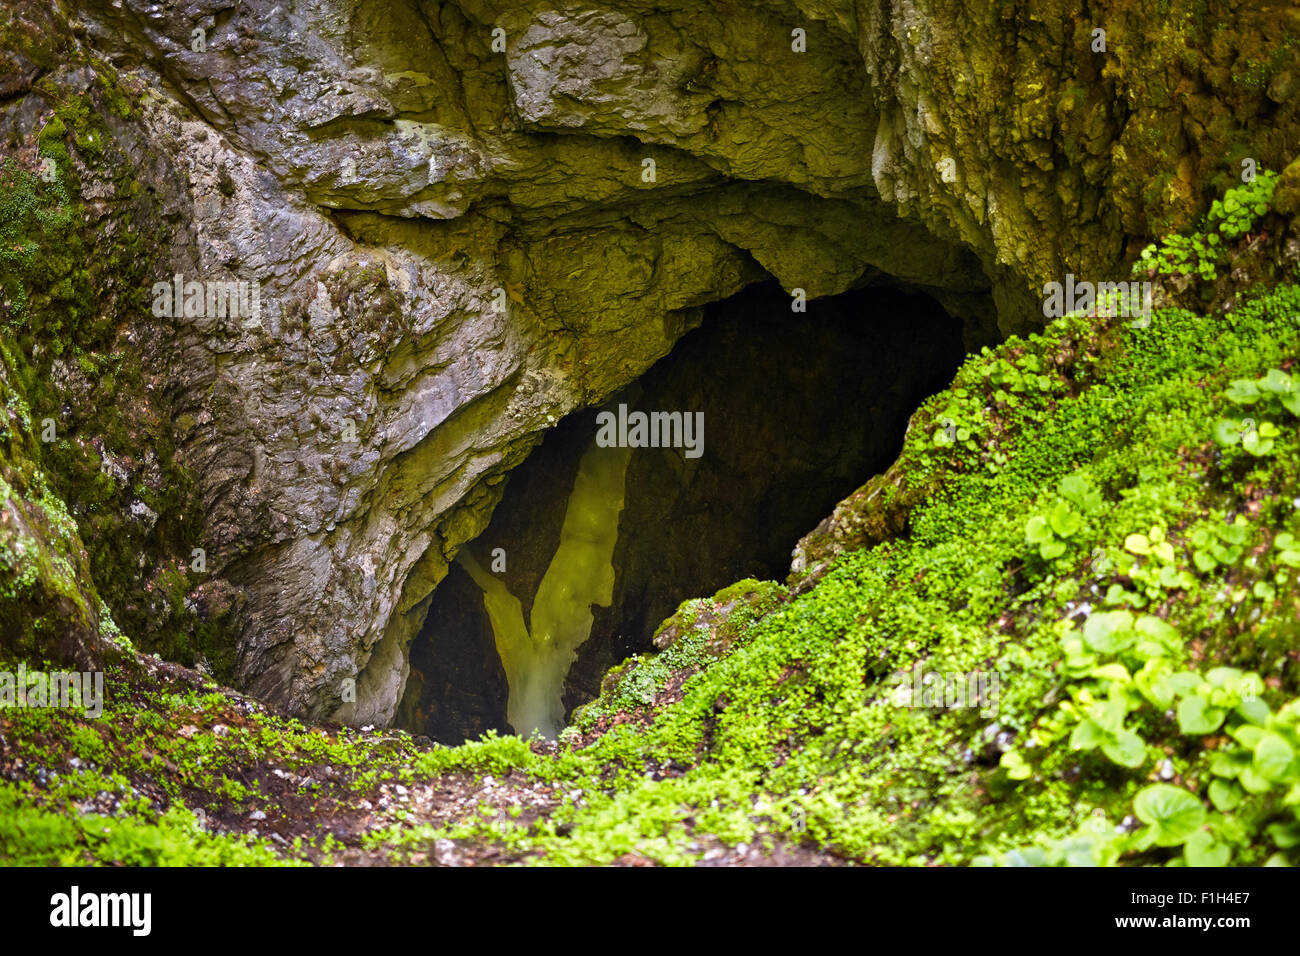 Mountain landscape with a very large sinkhole entrance Stock Photo